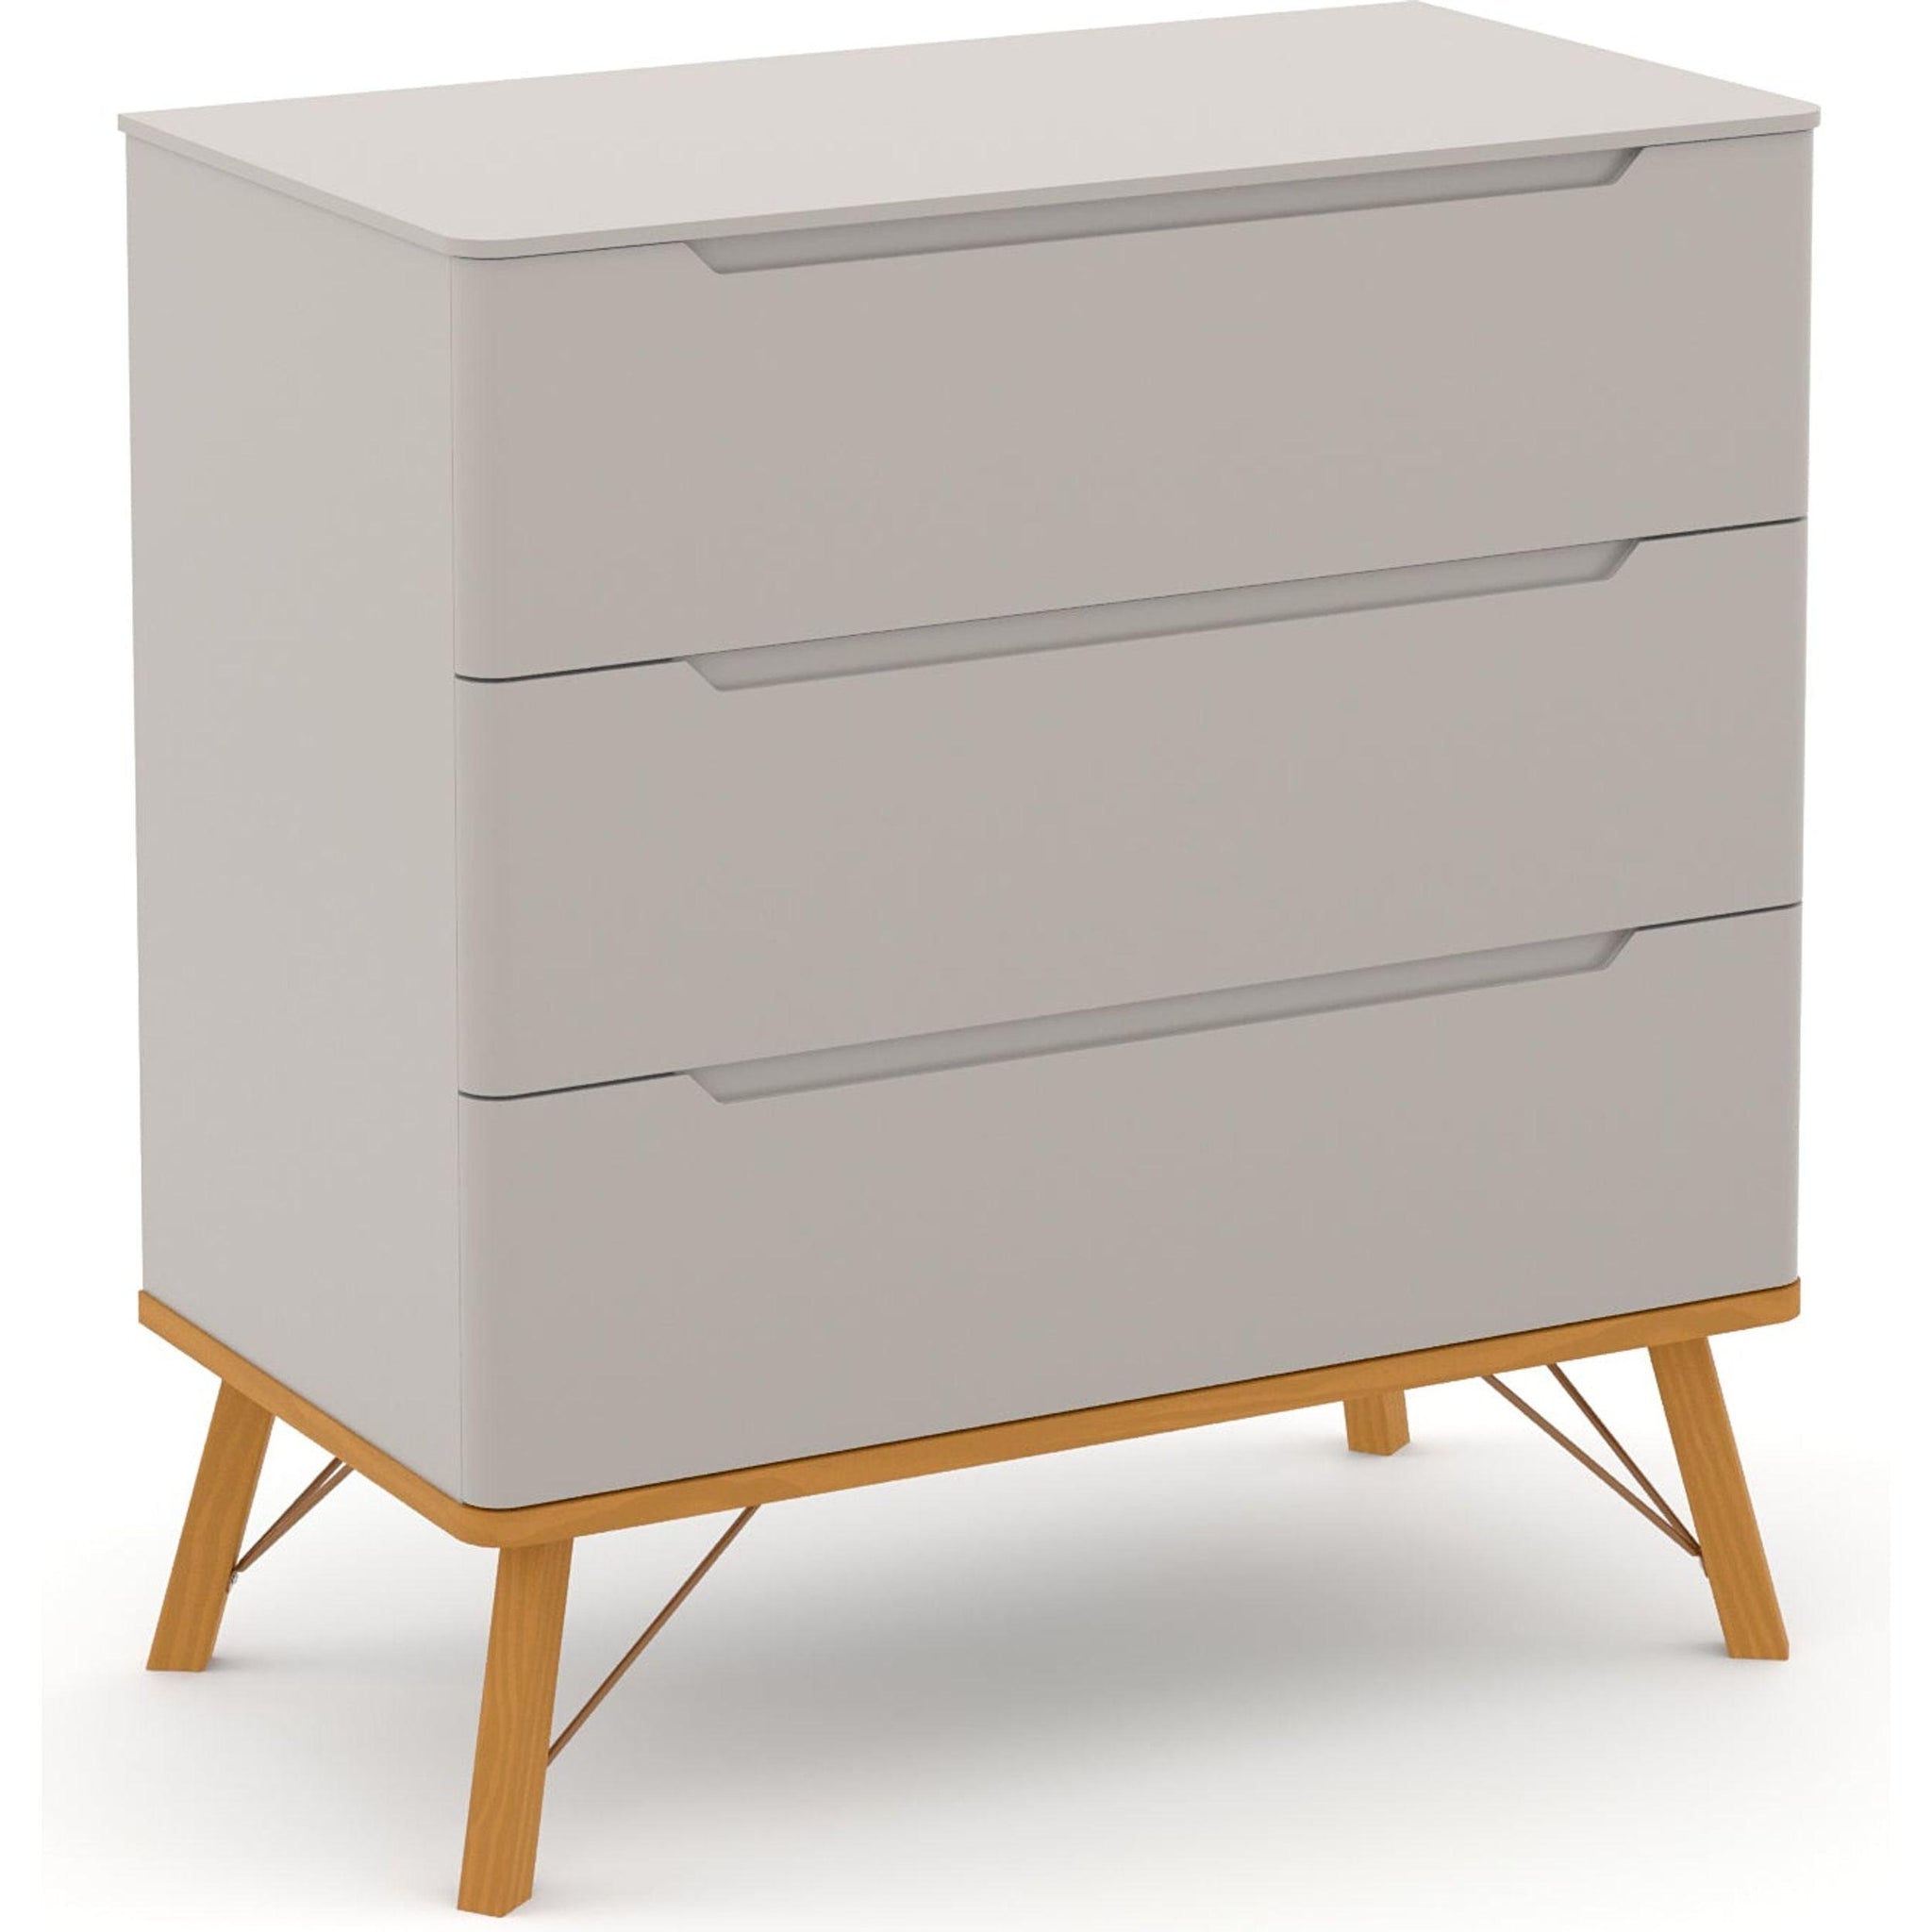 ALBI CABINET OF DRAWERS GREY/ECO WOOD